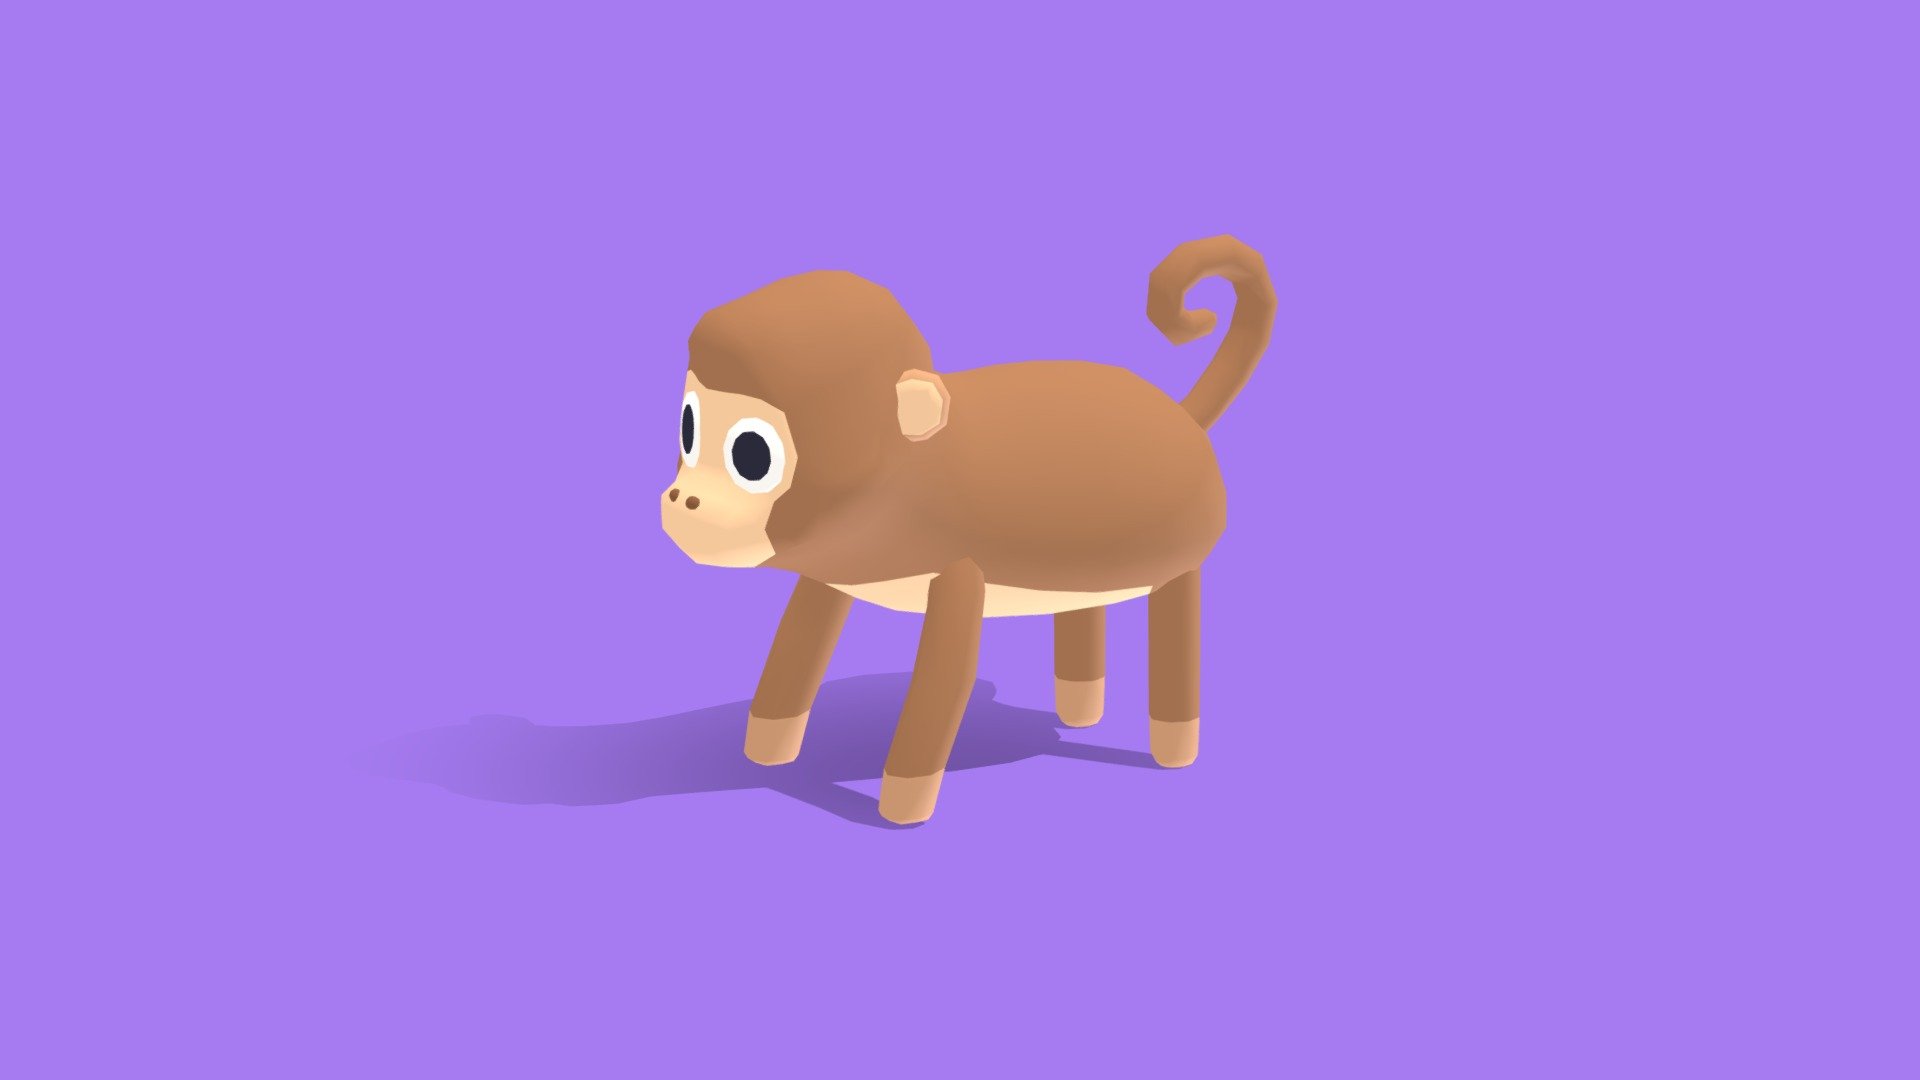 Similar models: 

Quirky Packs

Quirky Singles

-

Email: omabuarts@gmail.com

Website: omabuarts.com

-

Features:

✅ One (1) animal

✅ Tiny 16x4 px texture

✅ Rigged

✅ 18 animations

✅ 29 blendshapes/shapekeys for facial expression

✅ 4 Levels of Detail [between 300-9,000 tris]

✅ Mobile, AR/VR ready

❌ Vertex color

❌ Clean (non-overlapping) UV mapping

-

Animations:

Attack | Bounce | Clicked | Death

Eat | Fear | Fly | Hit

Idle_A | Idle_B | Idle_C

Jump | Roll | Run | Sit

Spin/Splash | Swim | Walk

-

Blendshapes/Shapekeys:

eyes.blink | eyes.happy | eyes.sad | eyes.sad

eyes.annoyed | eyes.squint | eyes.shrink | eyes.dead

eyes.lookOut | eyes.lookIn | eyes.lookUp | eyes.lookDown

eyes.excited-1-2 | eyes.rabid

eyes.spin-1-2 | eyes.spin-3

eyes.cry-1-2 | eyes.trauma

teardrop-1-2.L | teardrop-1-2.R

sweat-1-2.L | sweat-1-2.R - Monkey - Quirky Series - Buy Royalty Free 3D model by Omabuarts Studio (@omabuarts) 3d model